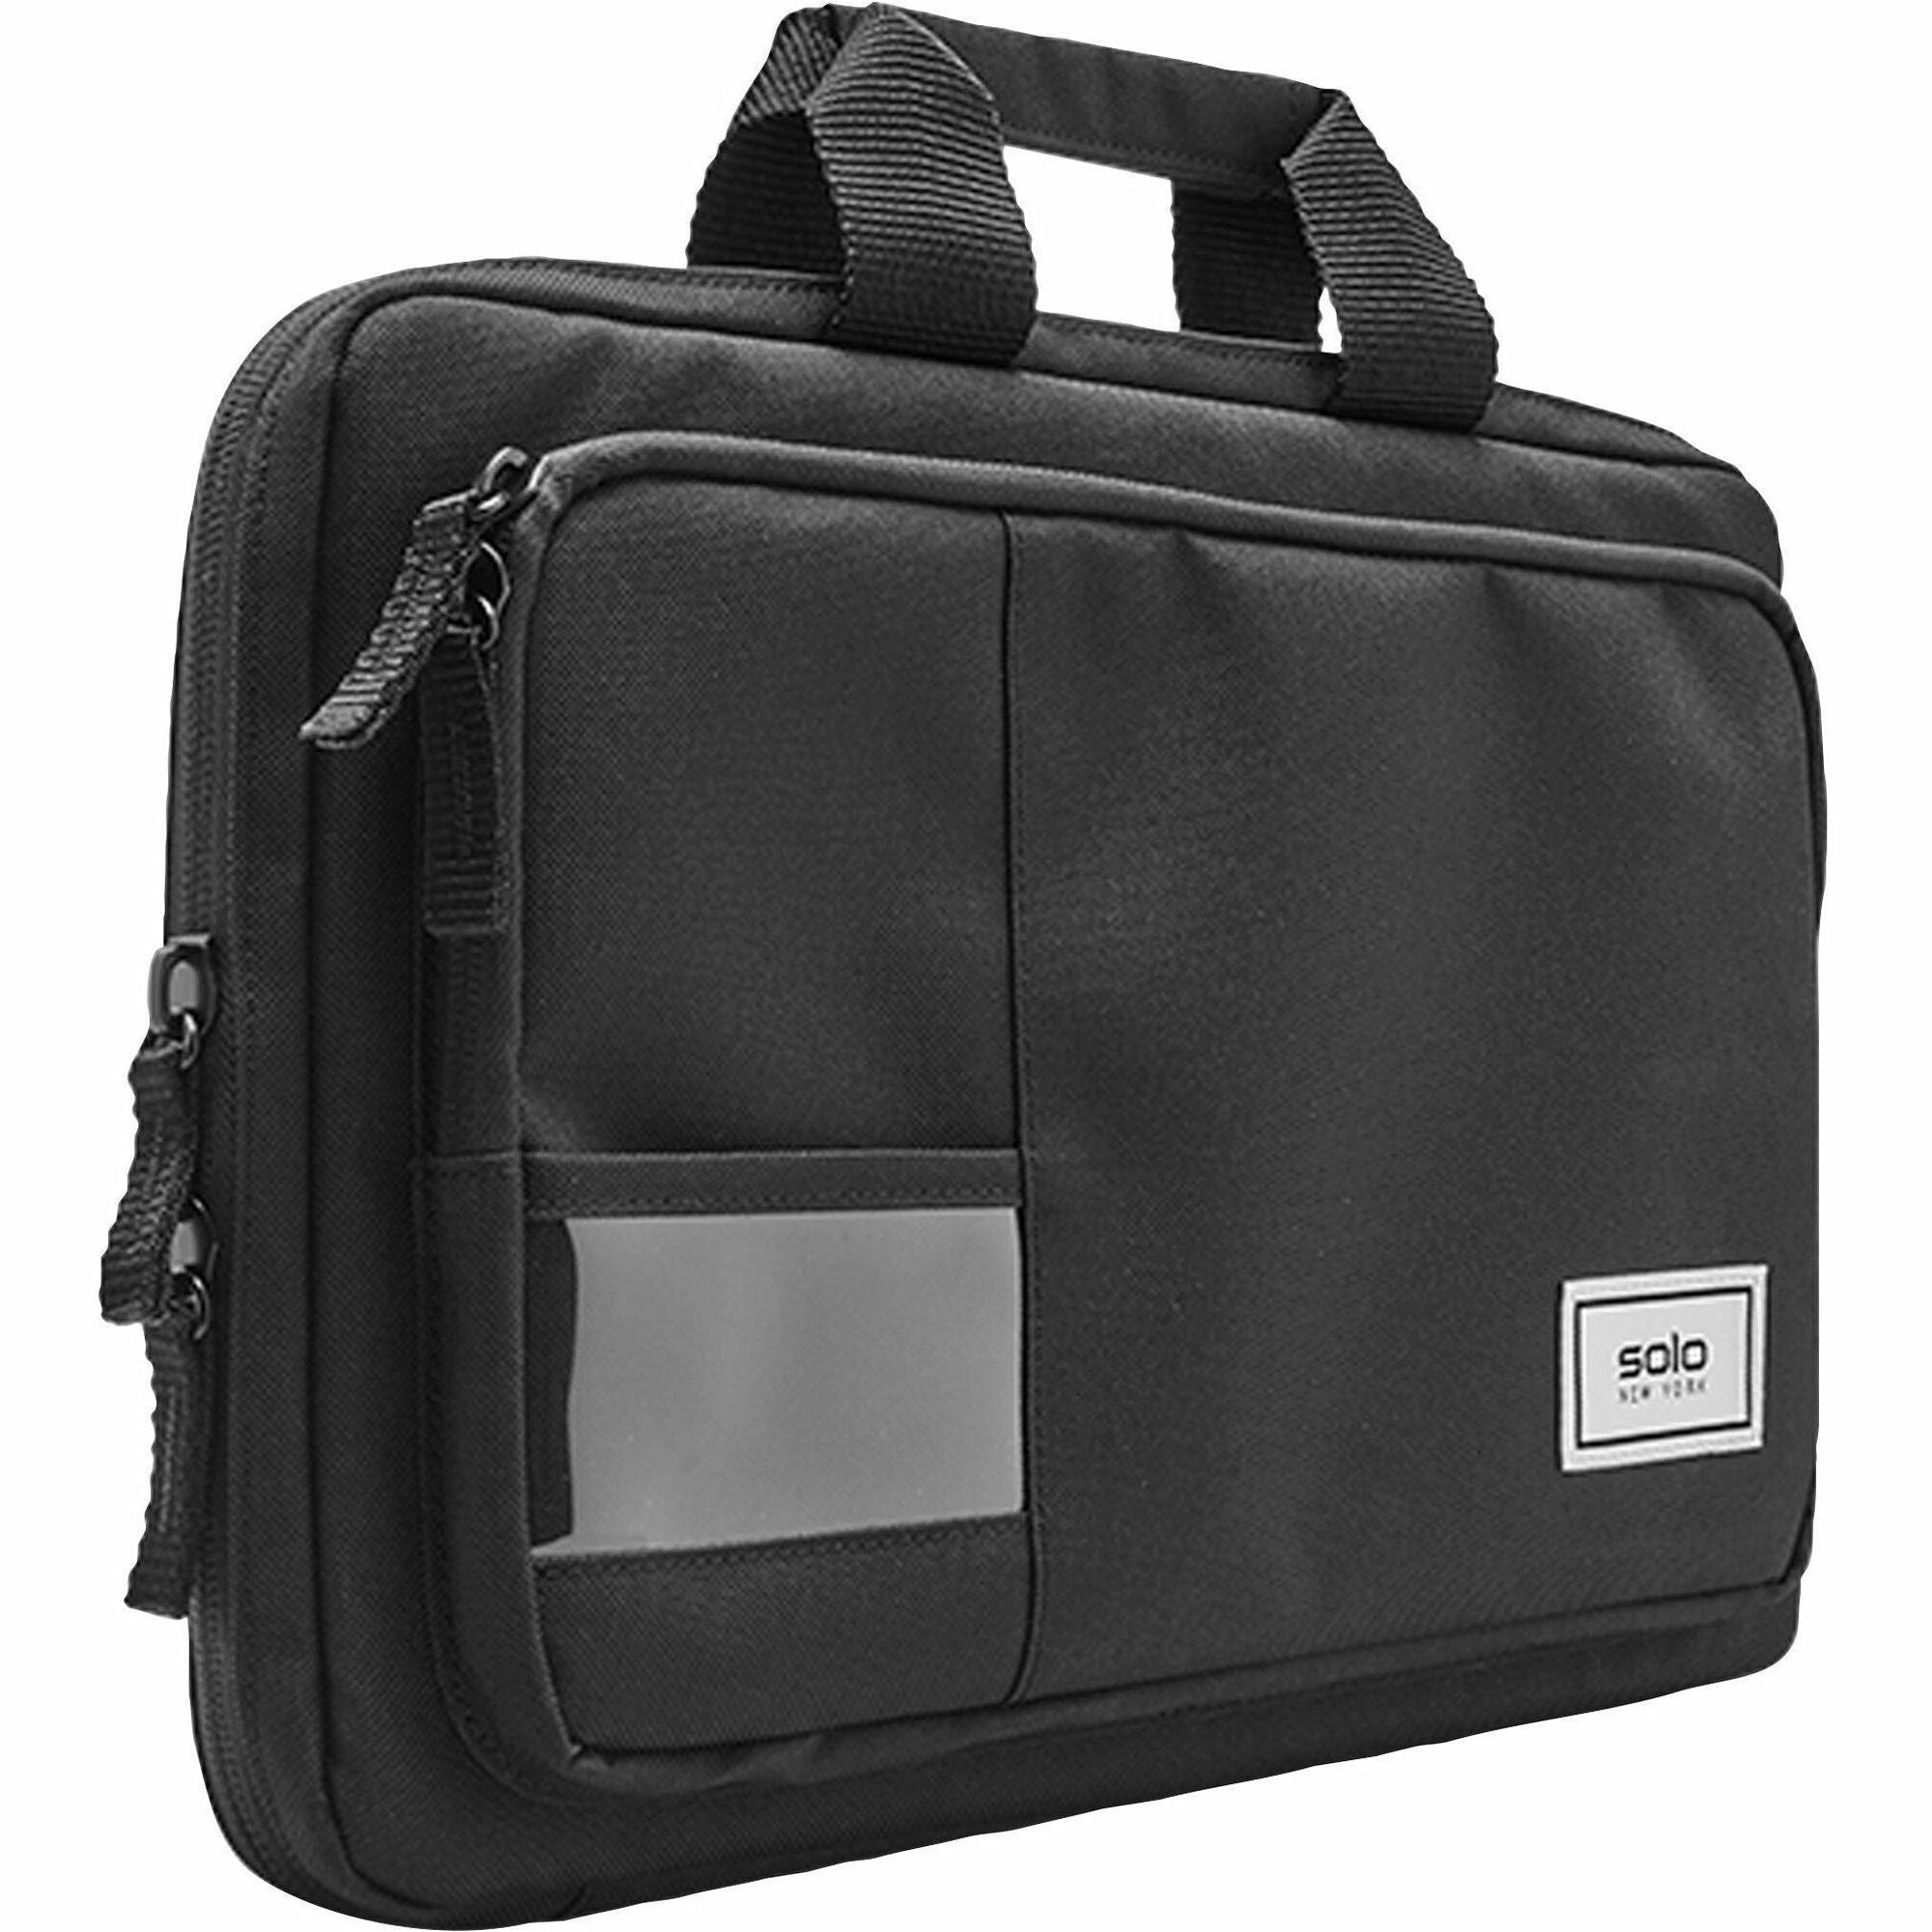 solo-carrying-case-for-116-chromebook-notebook-black-drop-resistant-bacterial-resistant-water-resistant-fabric-body-handle-1-each_uslpro1534 - 1